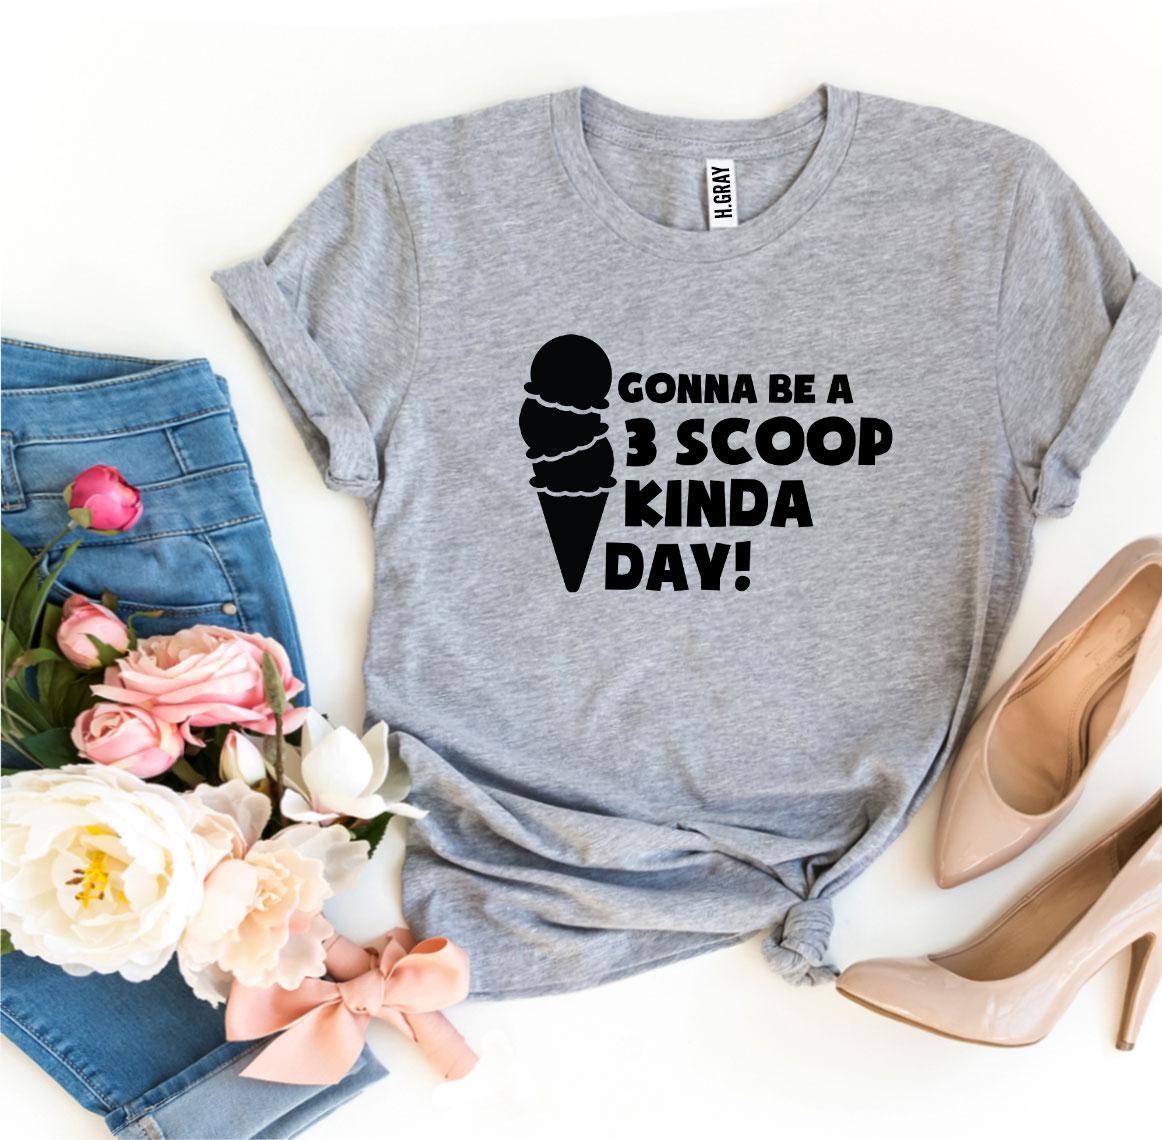 Gonna Be a 3 Scoop Kinda Day! T-shirt